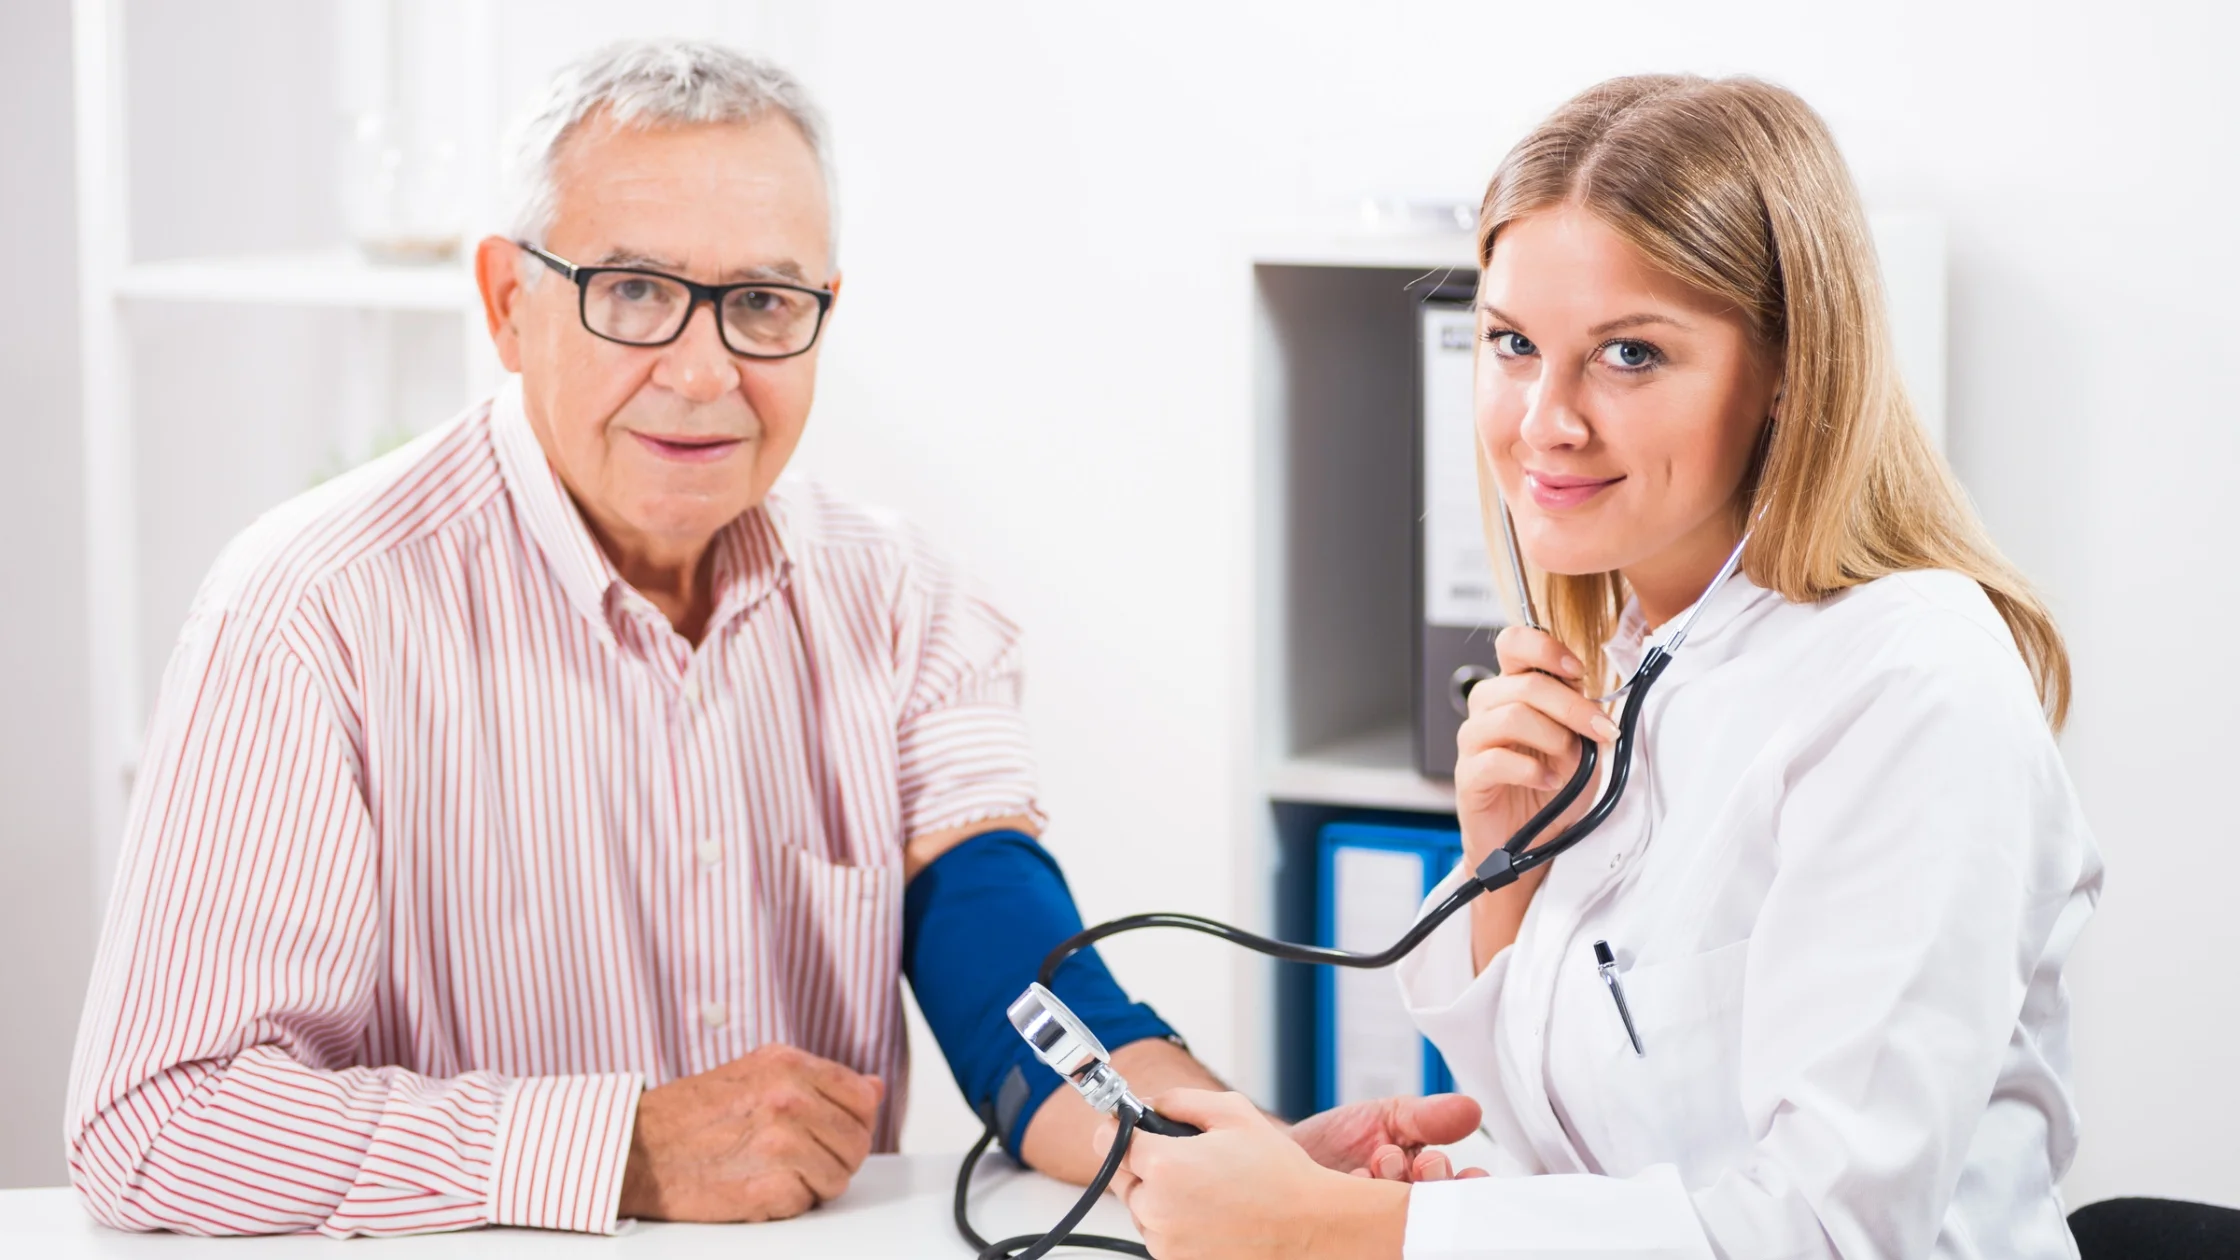 Why Remote Patient Monitoring Is Important To Manage High Blood Pressure